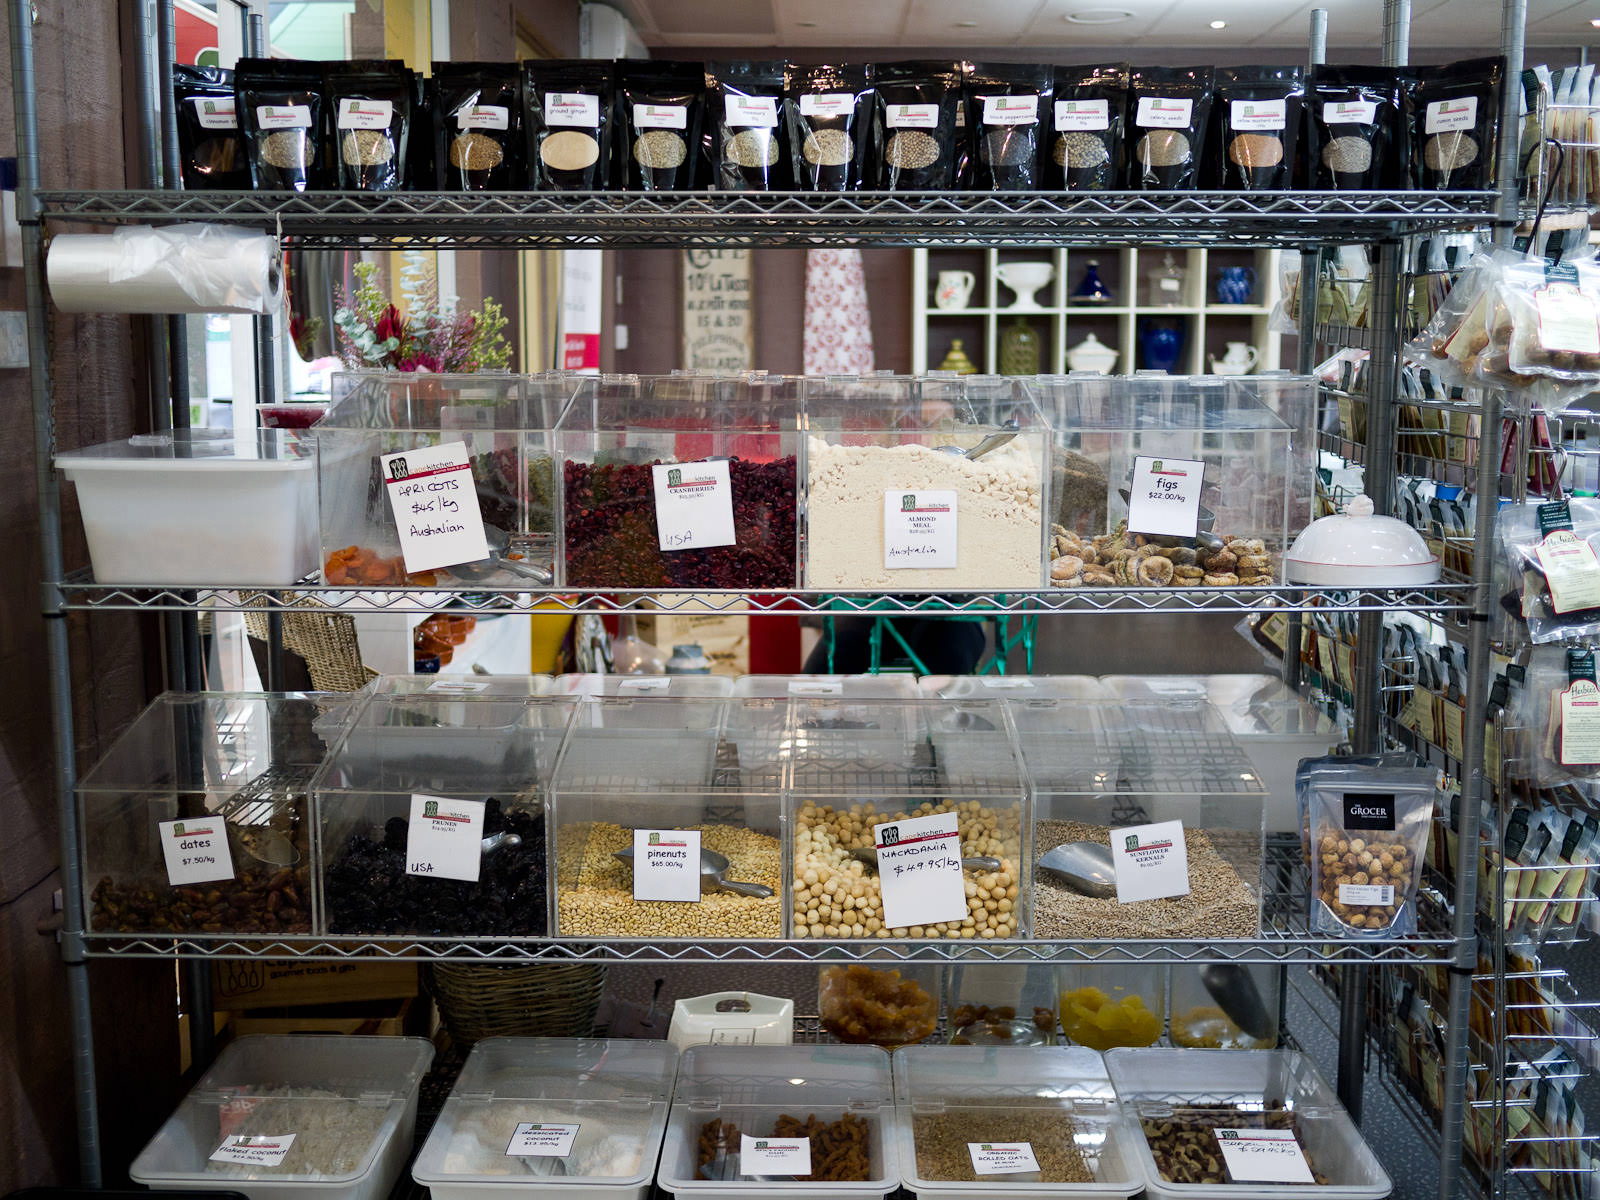 Dried spices, nuts and fruits